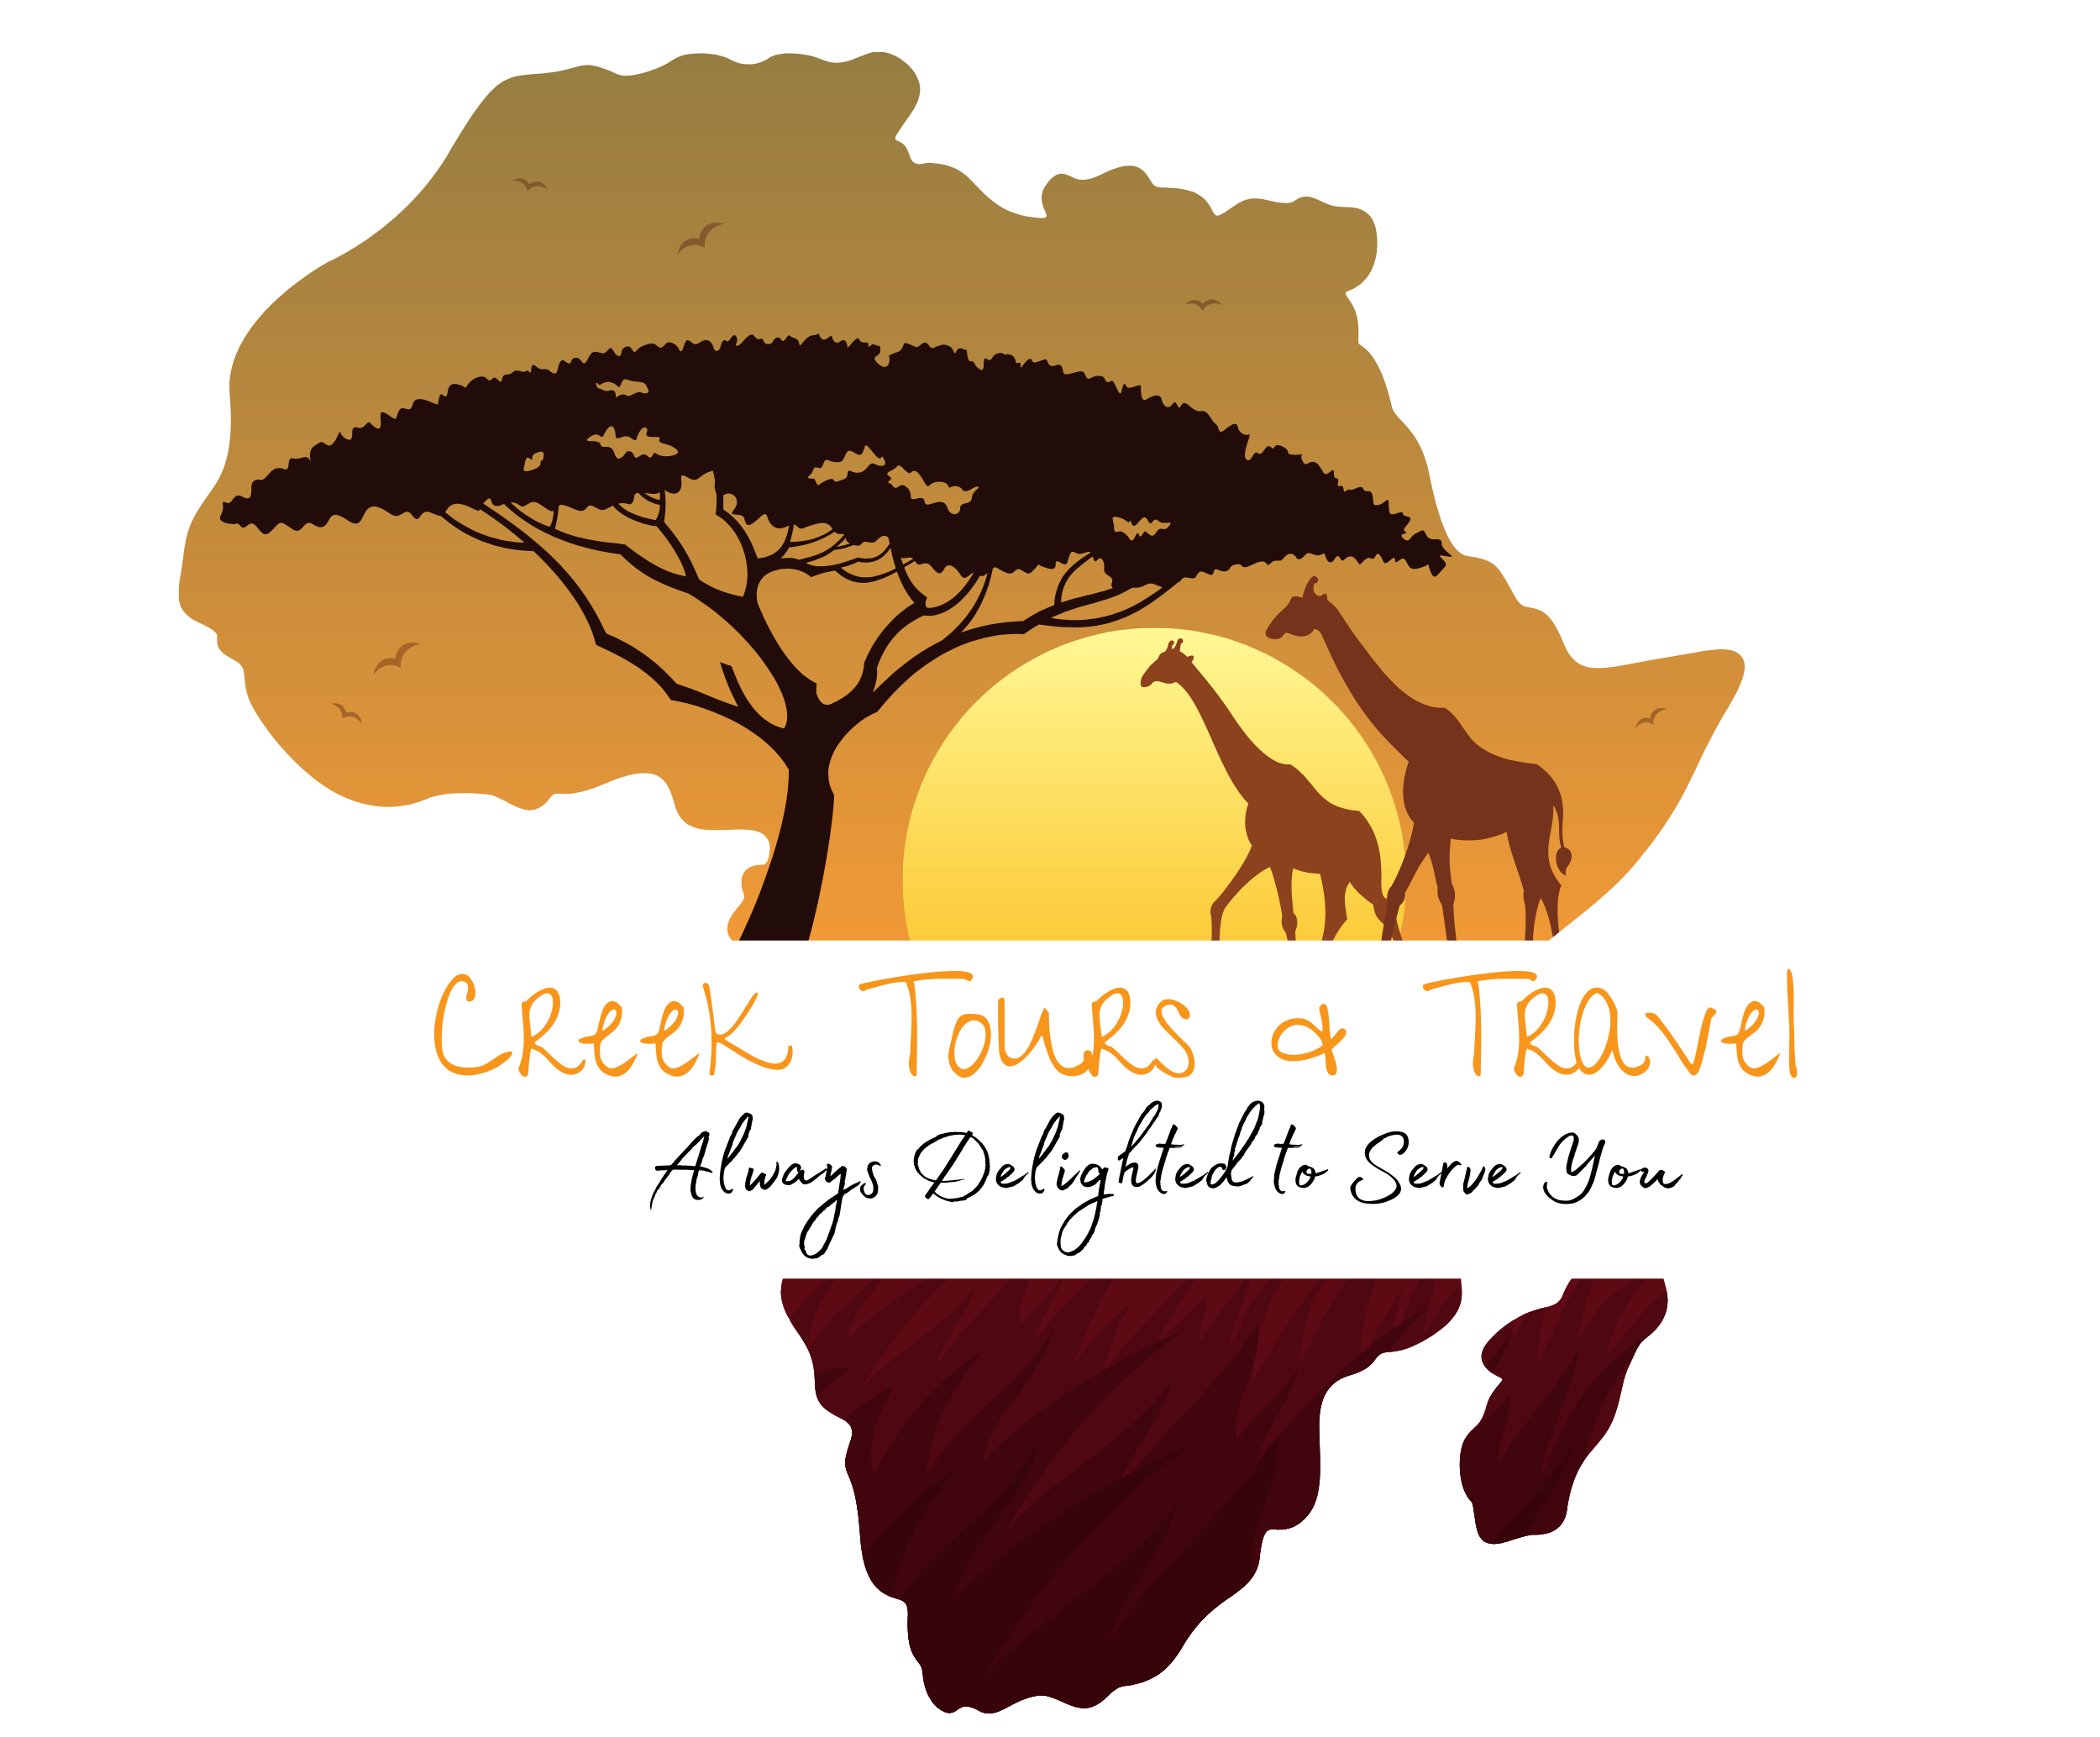 Creek Tours | Egypt Holiday/Honeymoon Packages - Creek Tours